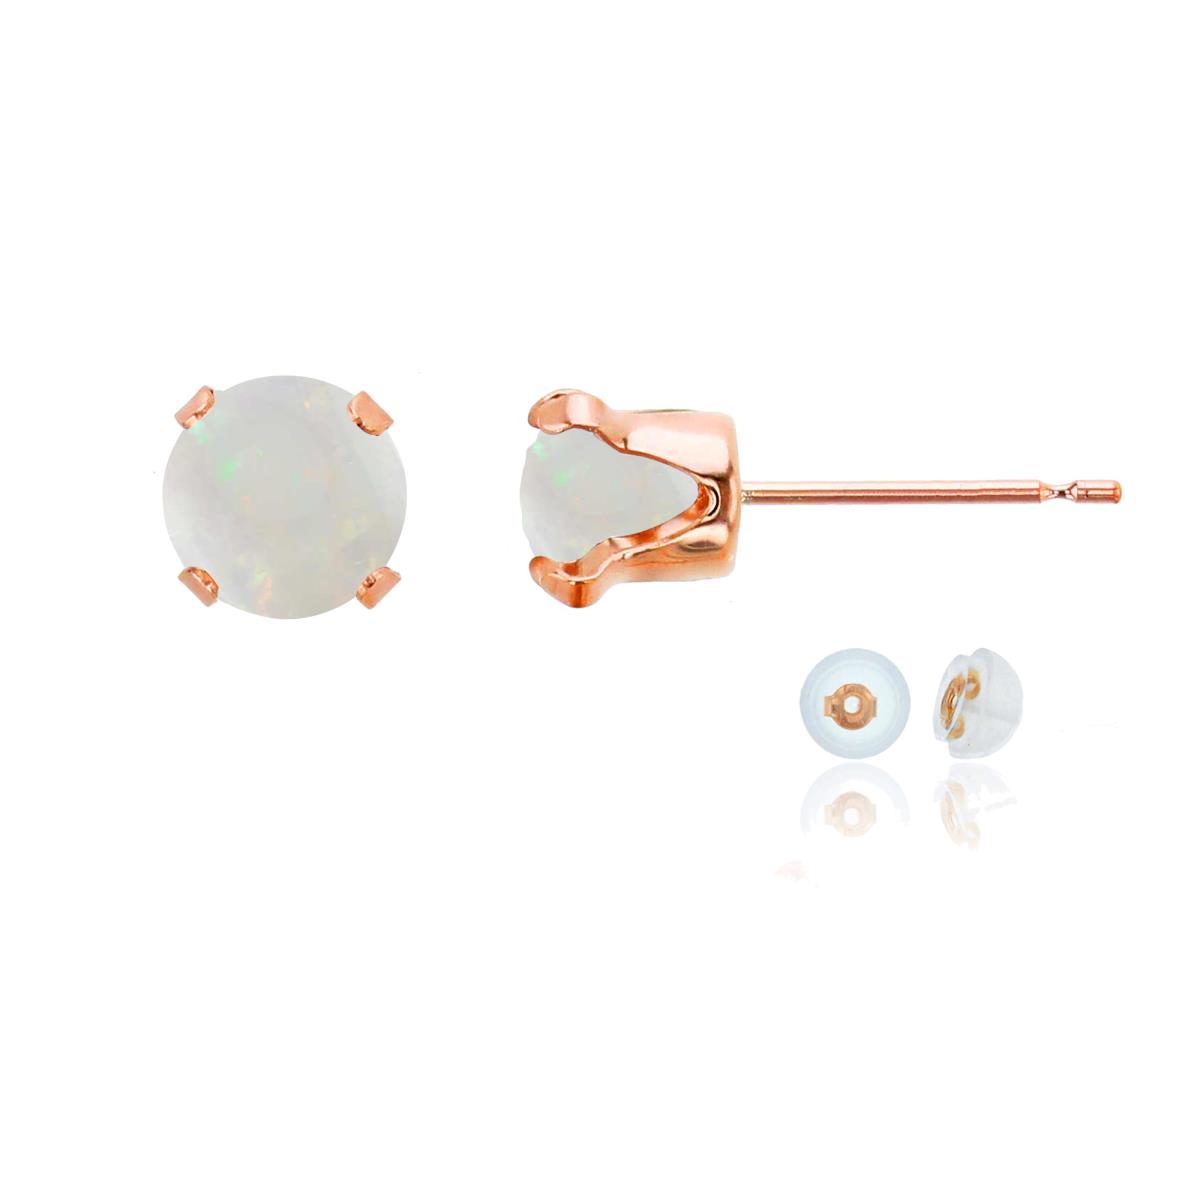 10K Rose Gold 6mm Round Opal Stud Earring with Silicone Back